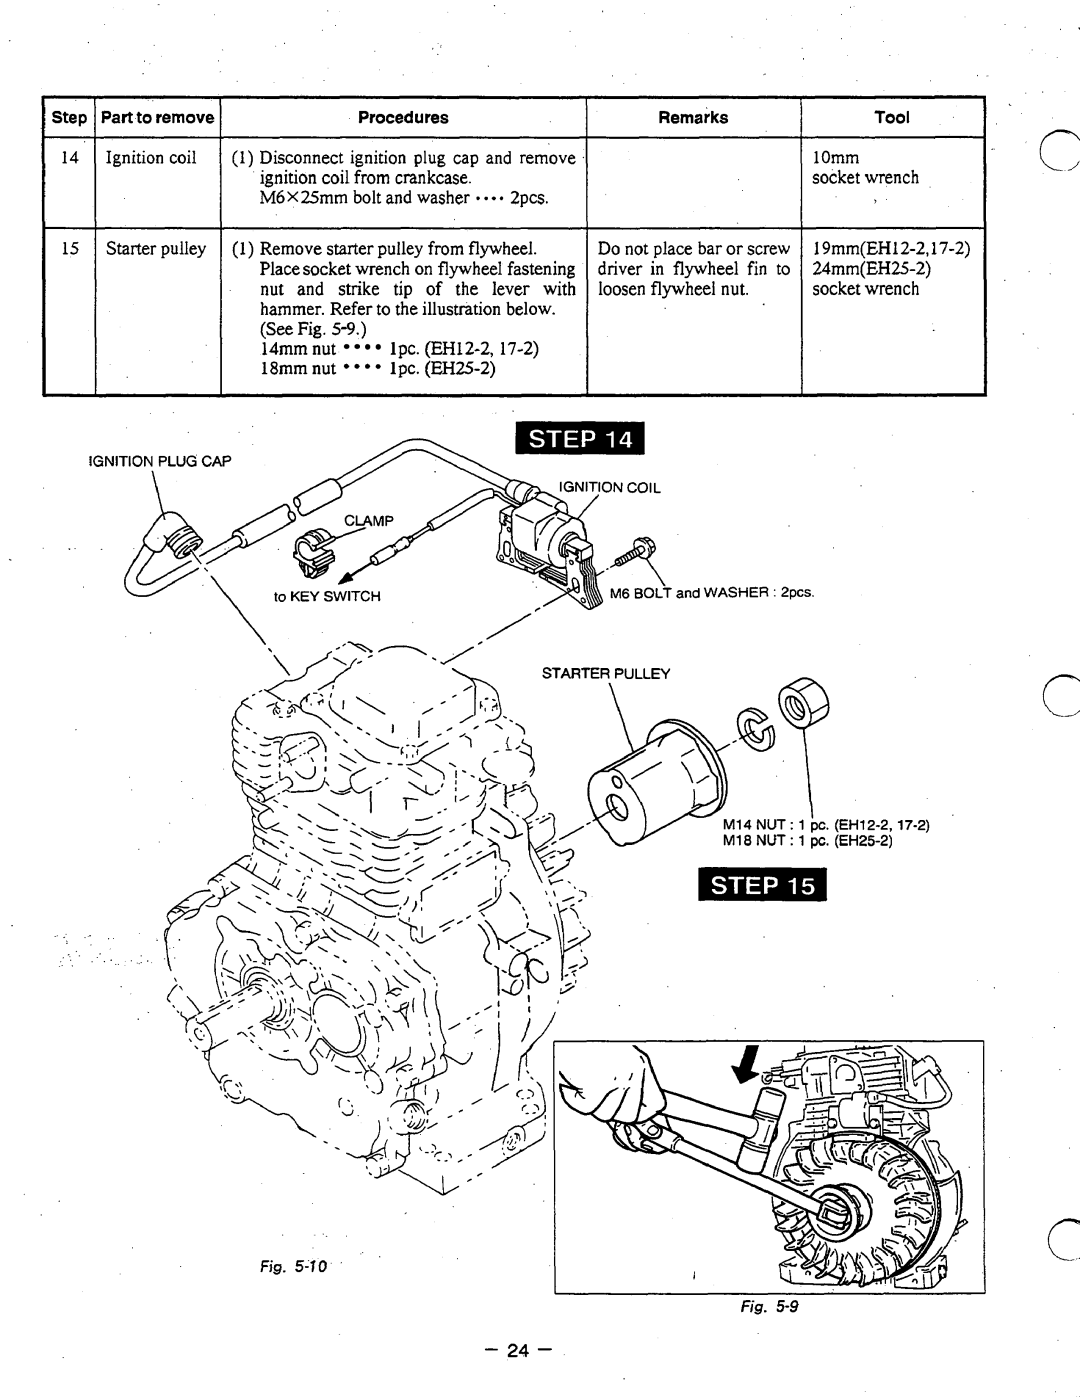 Subaru Robin Power Products EH12-2, EH17-2, EH25-2 manual Procedures, I Remarks, Remove starterpulley from flywheel 